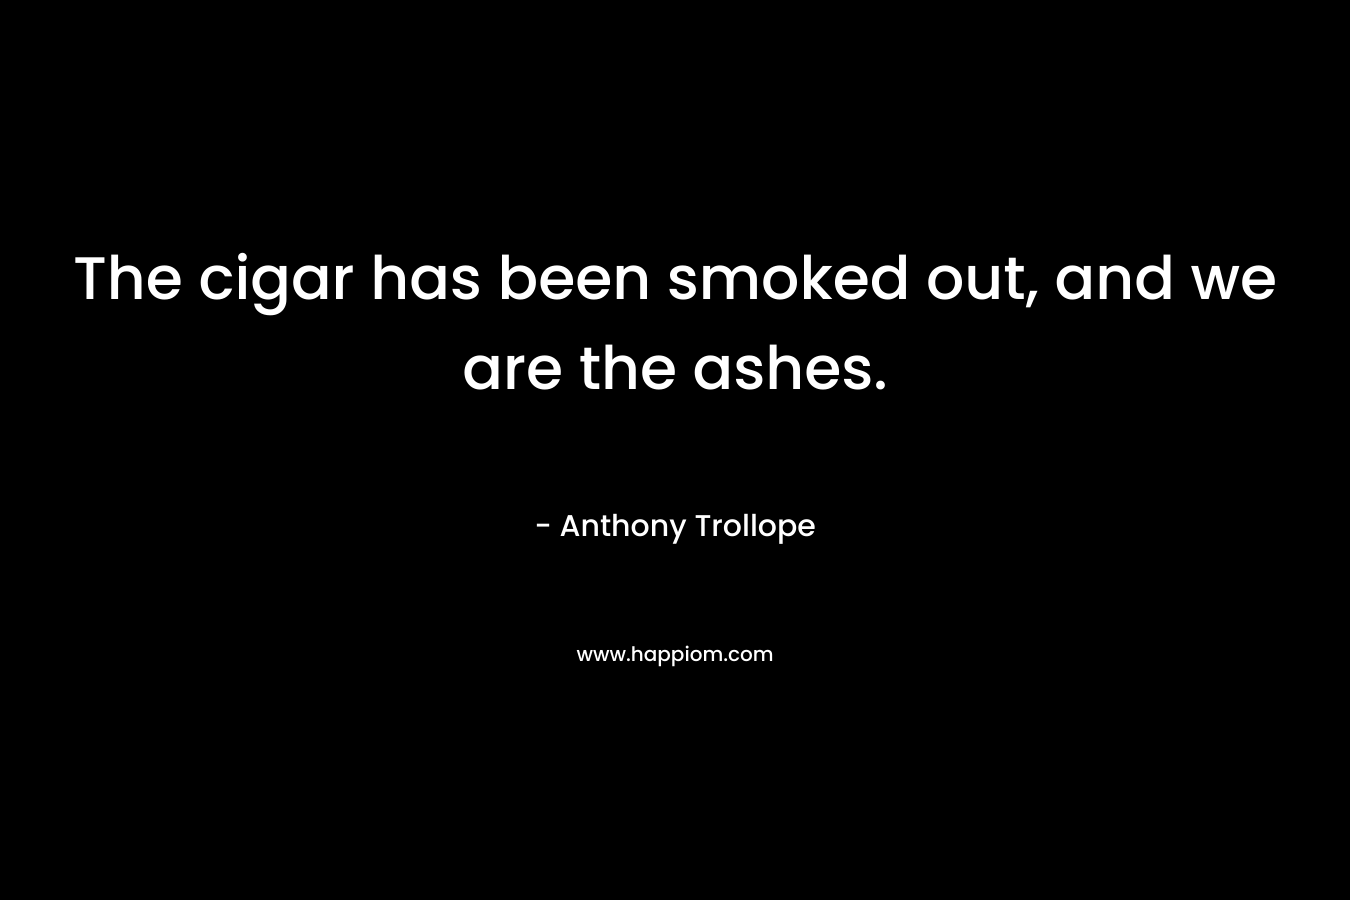 The cigar has been smoked out, and we are the ashes. – Anthony Trollope